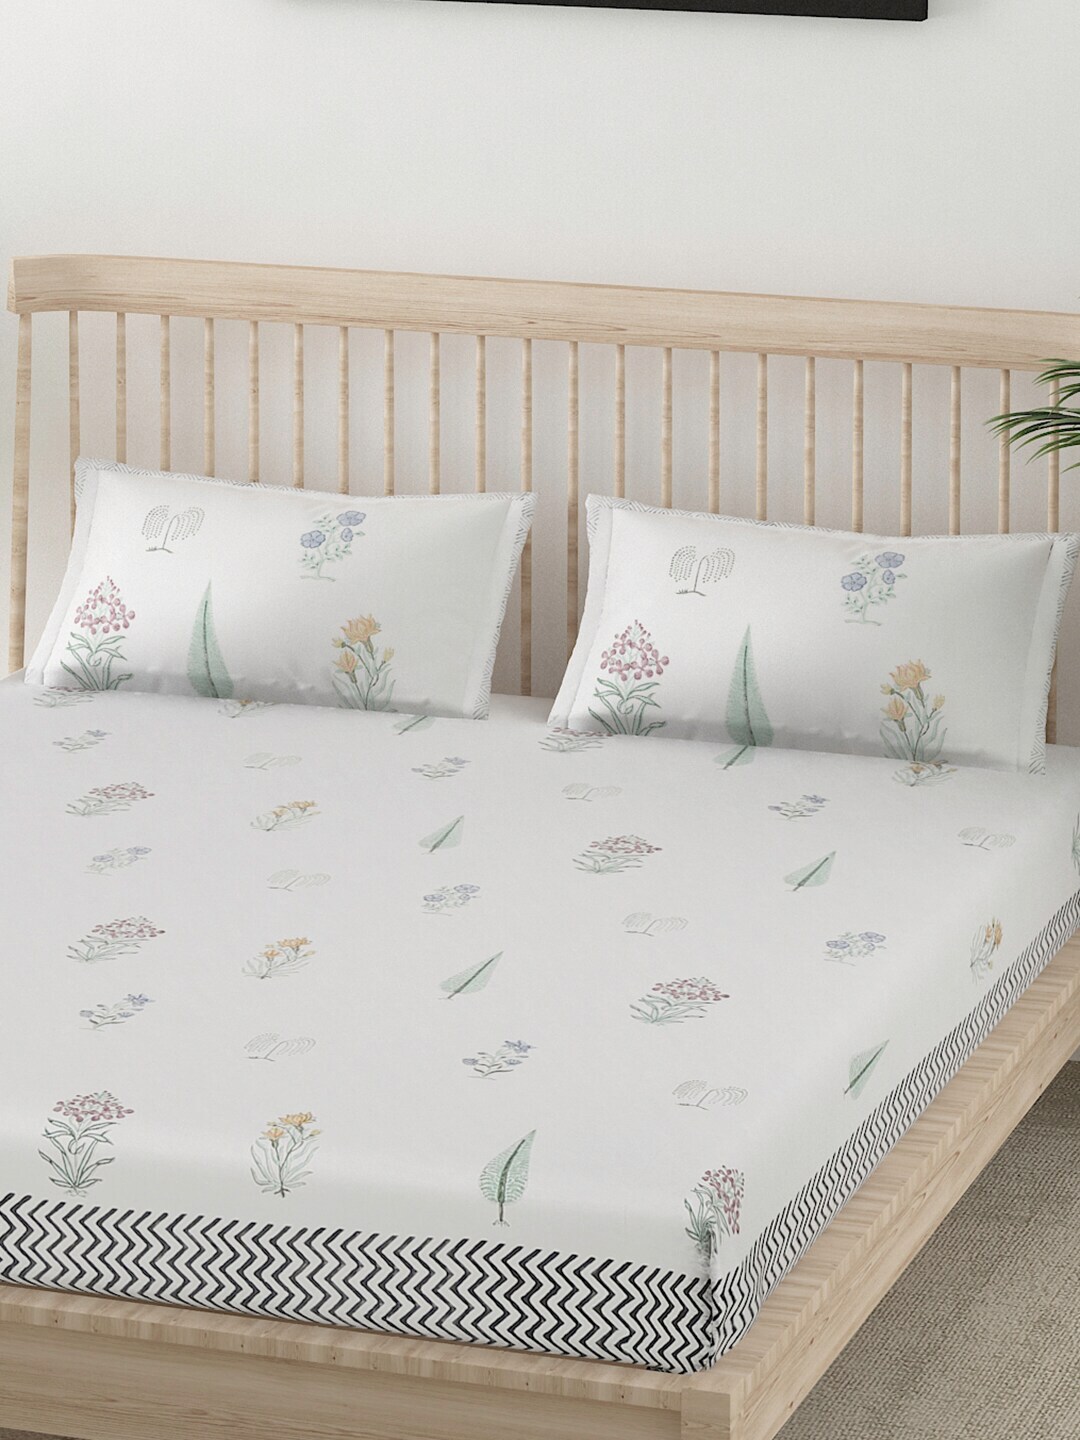 EK BY EKTA KAPOOR Off-White & Green Ethnic Motifs 144 TC Pure Cotton King Bedsheet with 2 Pillow Covers Price in India